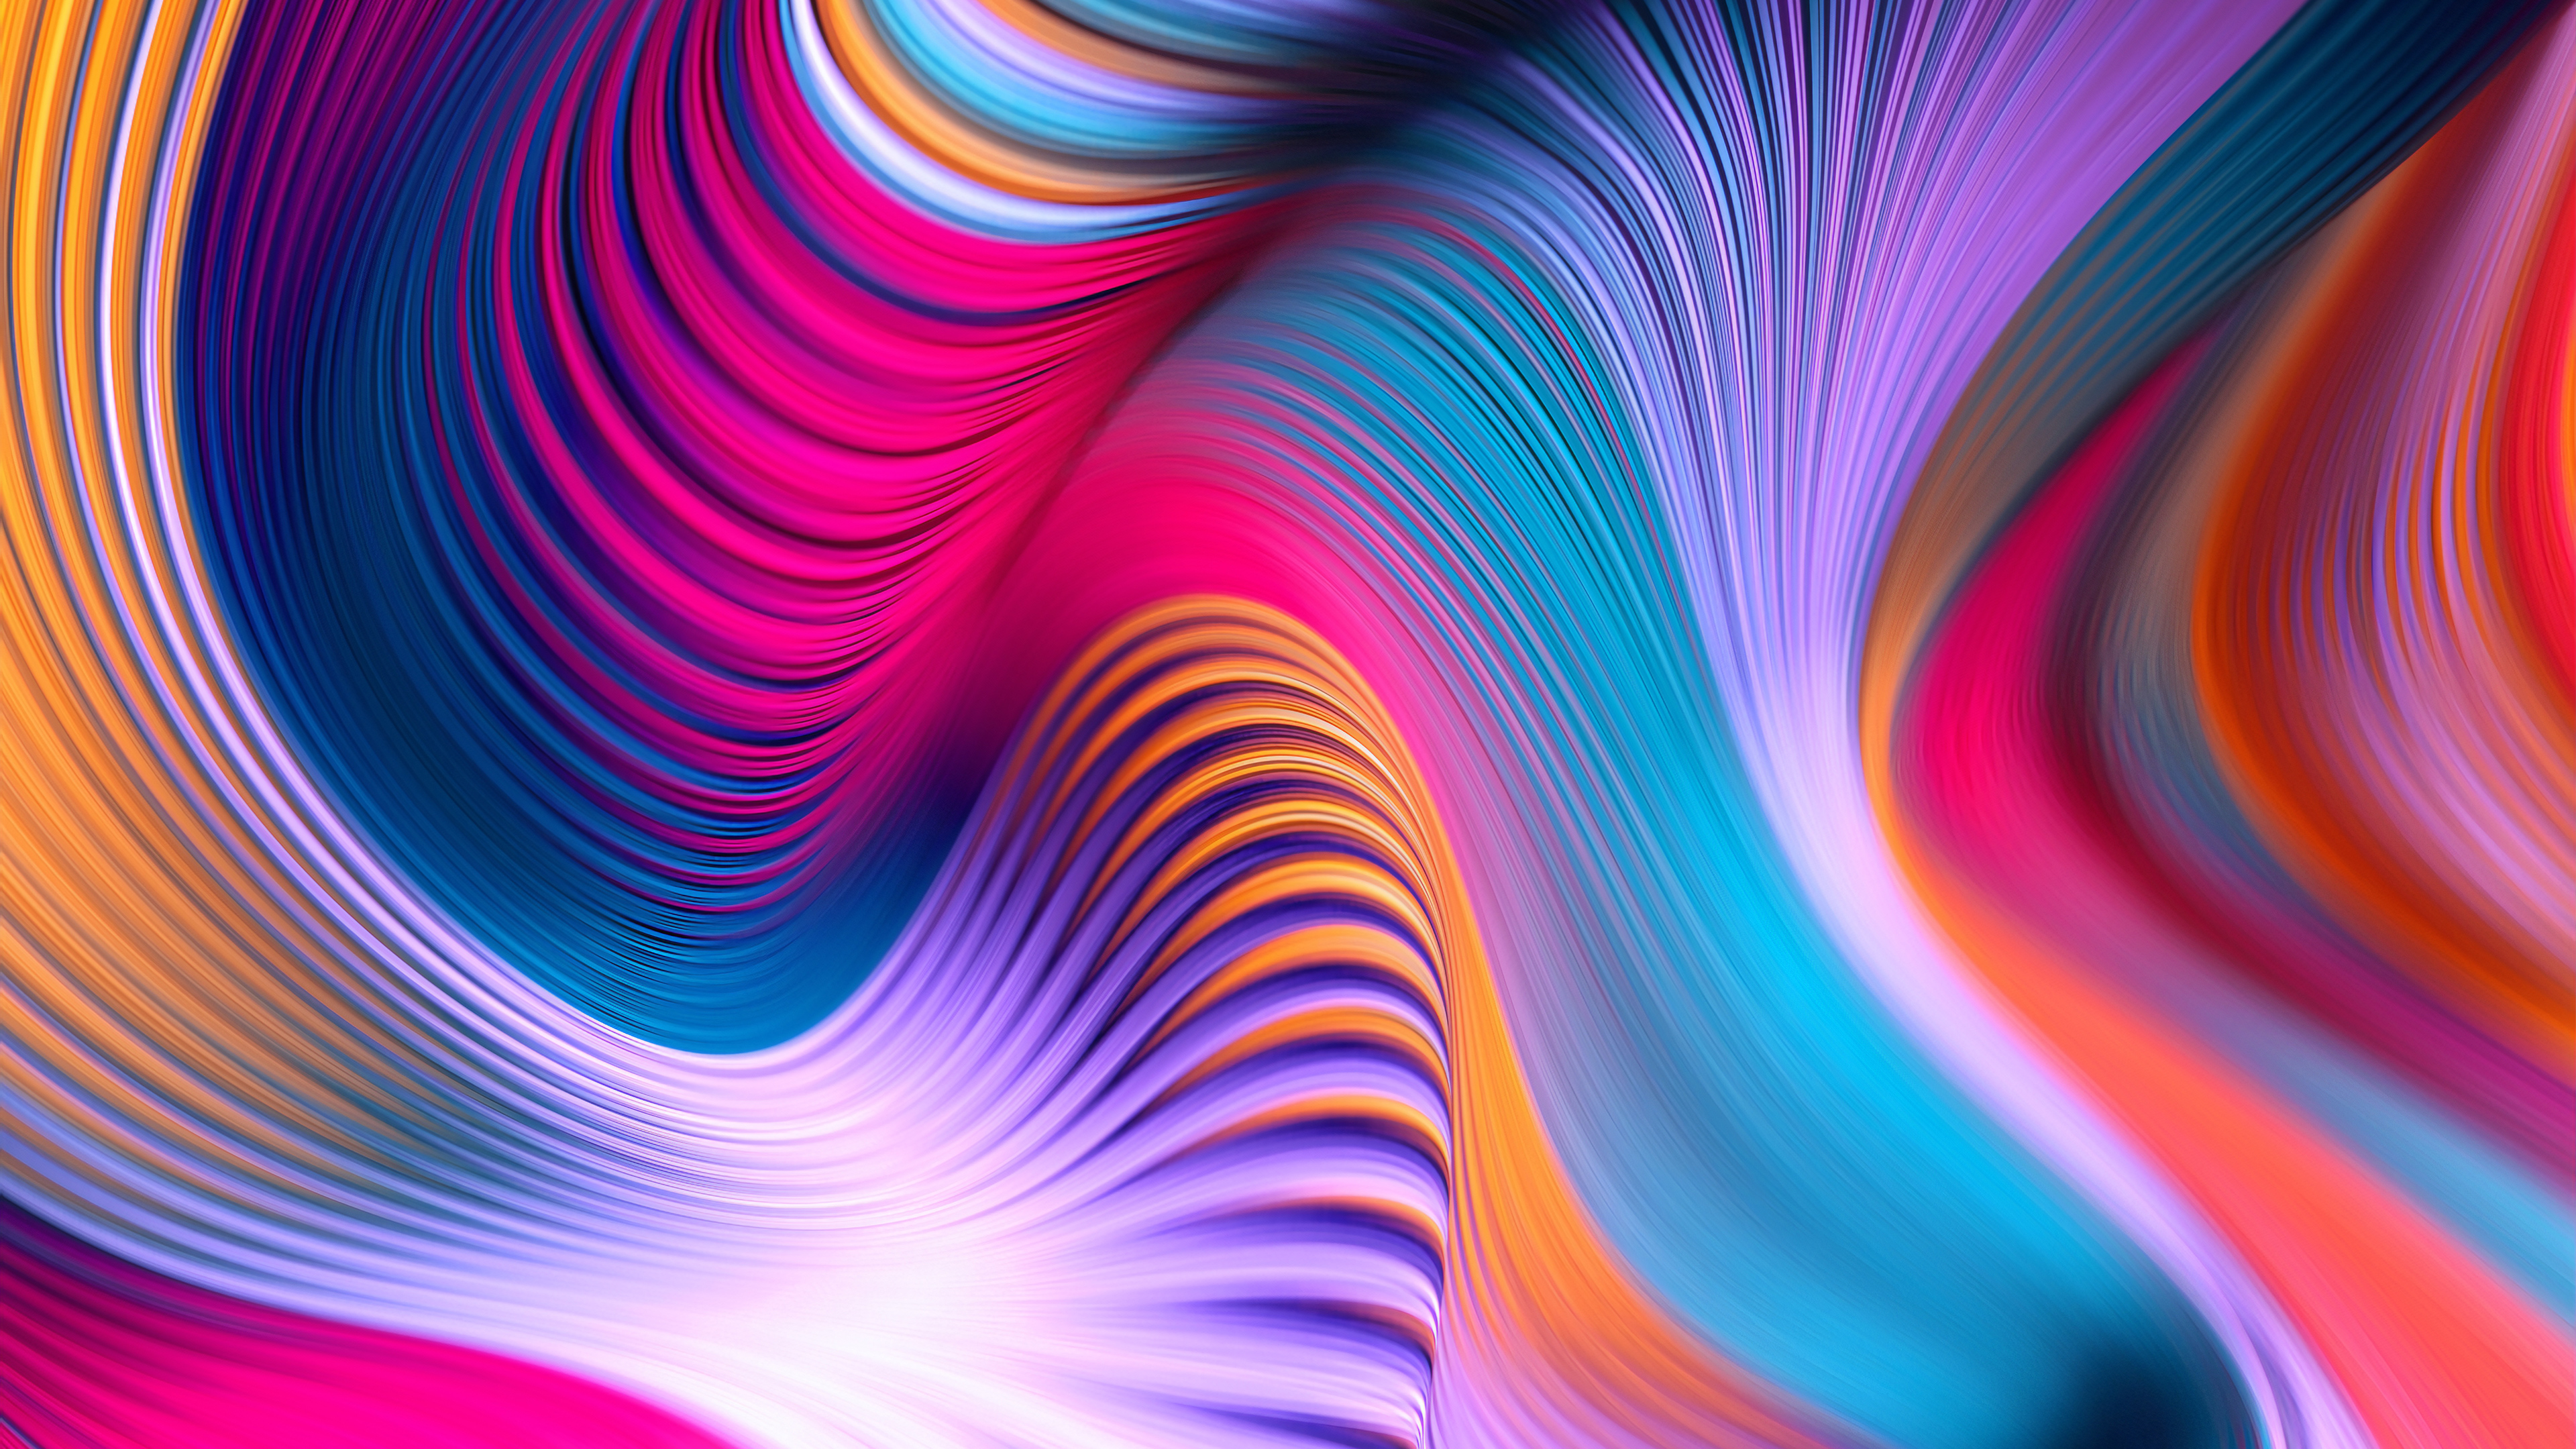 colorful movements of abstract art 1563221540 - Colorful Movements Of Abstract Art - hd-wallpapers, digital art wallpapers, colorful wallpapers, behance wallpapers, artwork wallpapers, artist wallpapers, abstract wallpapers, 4k-wallpapers